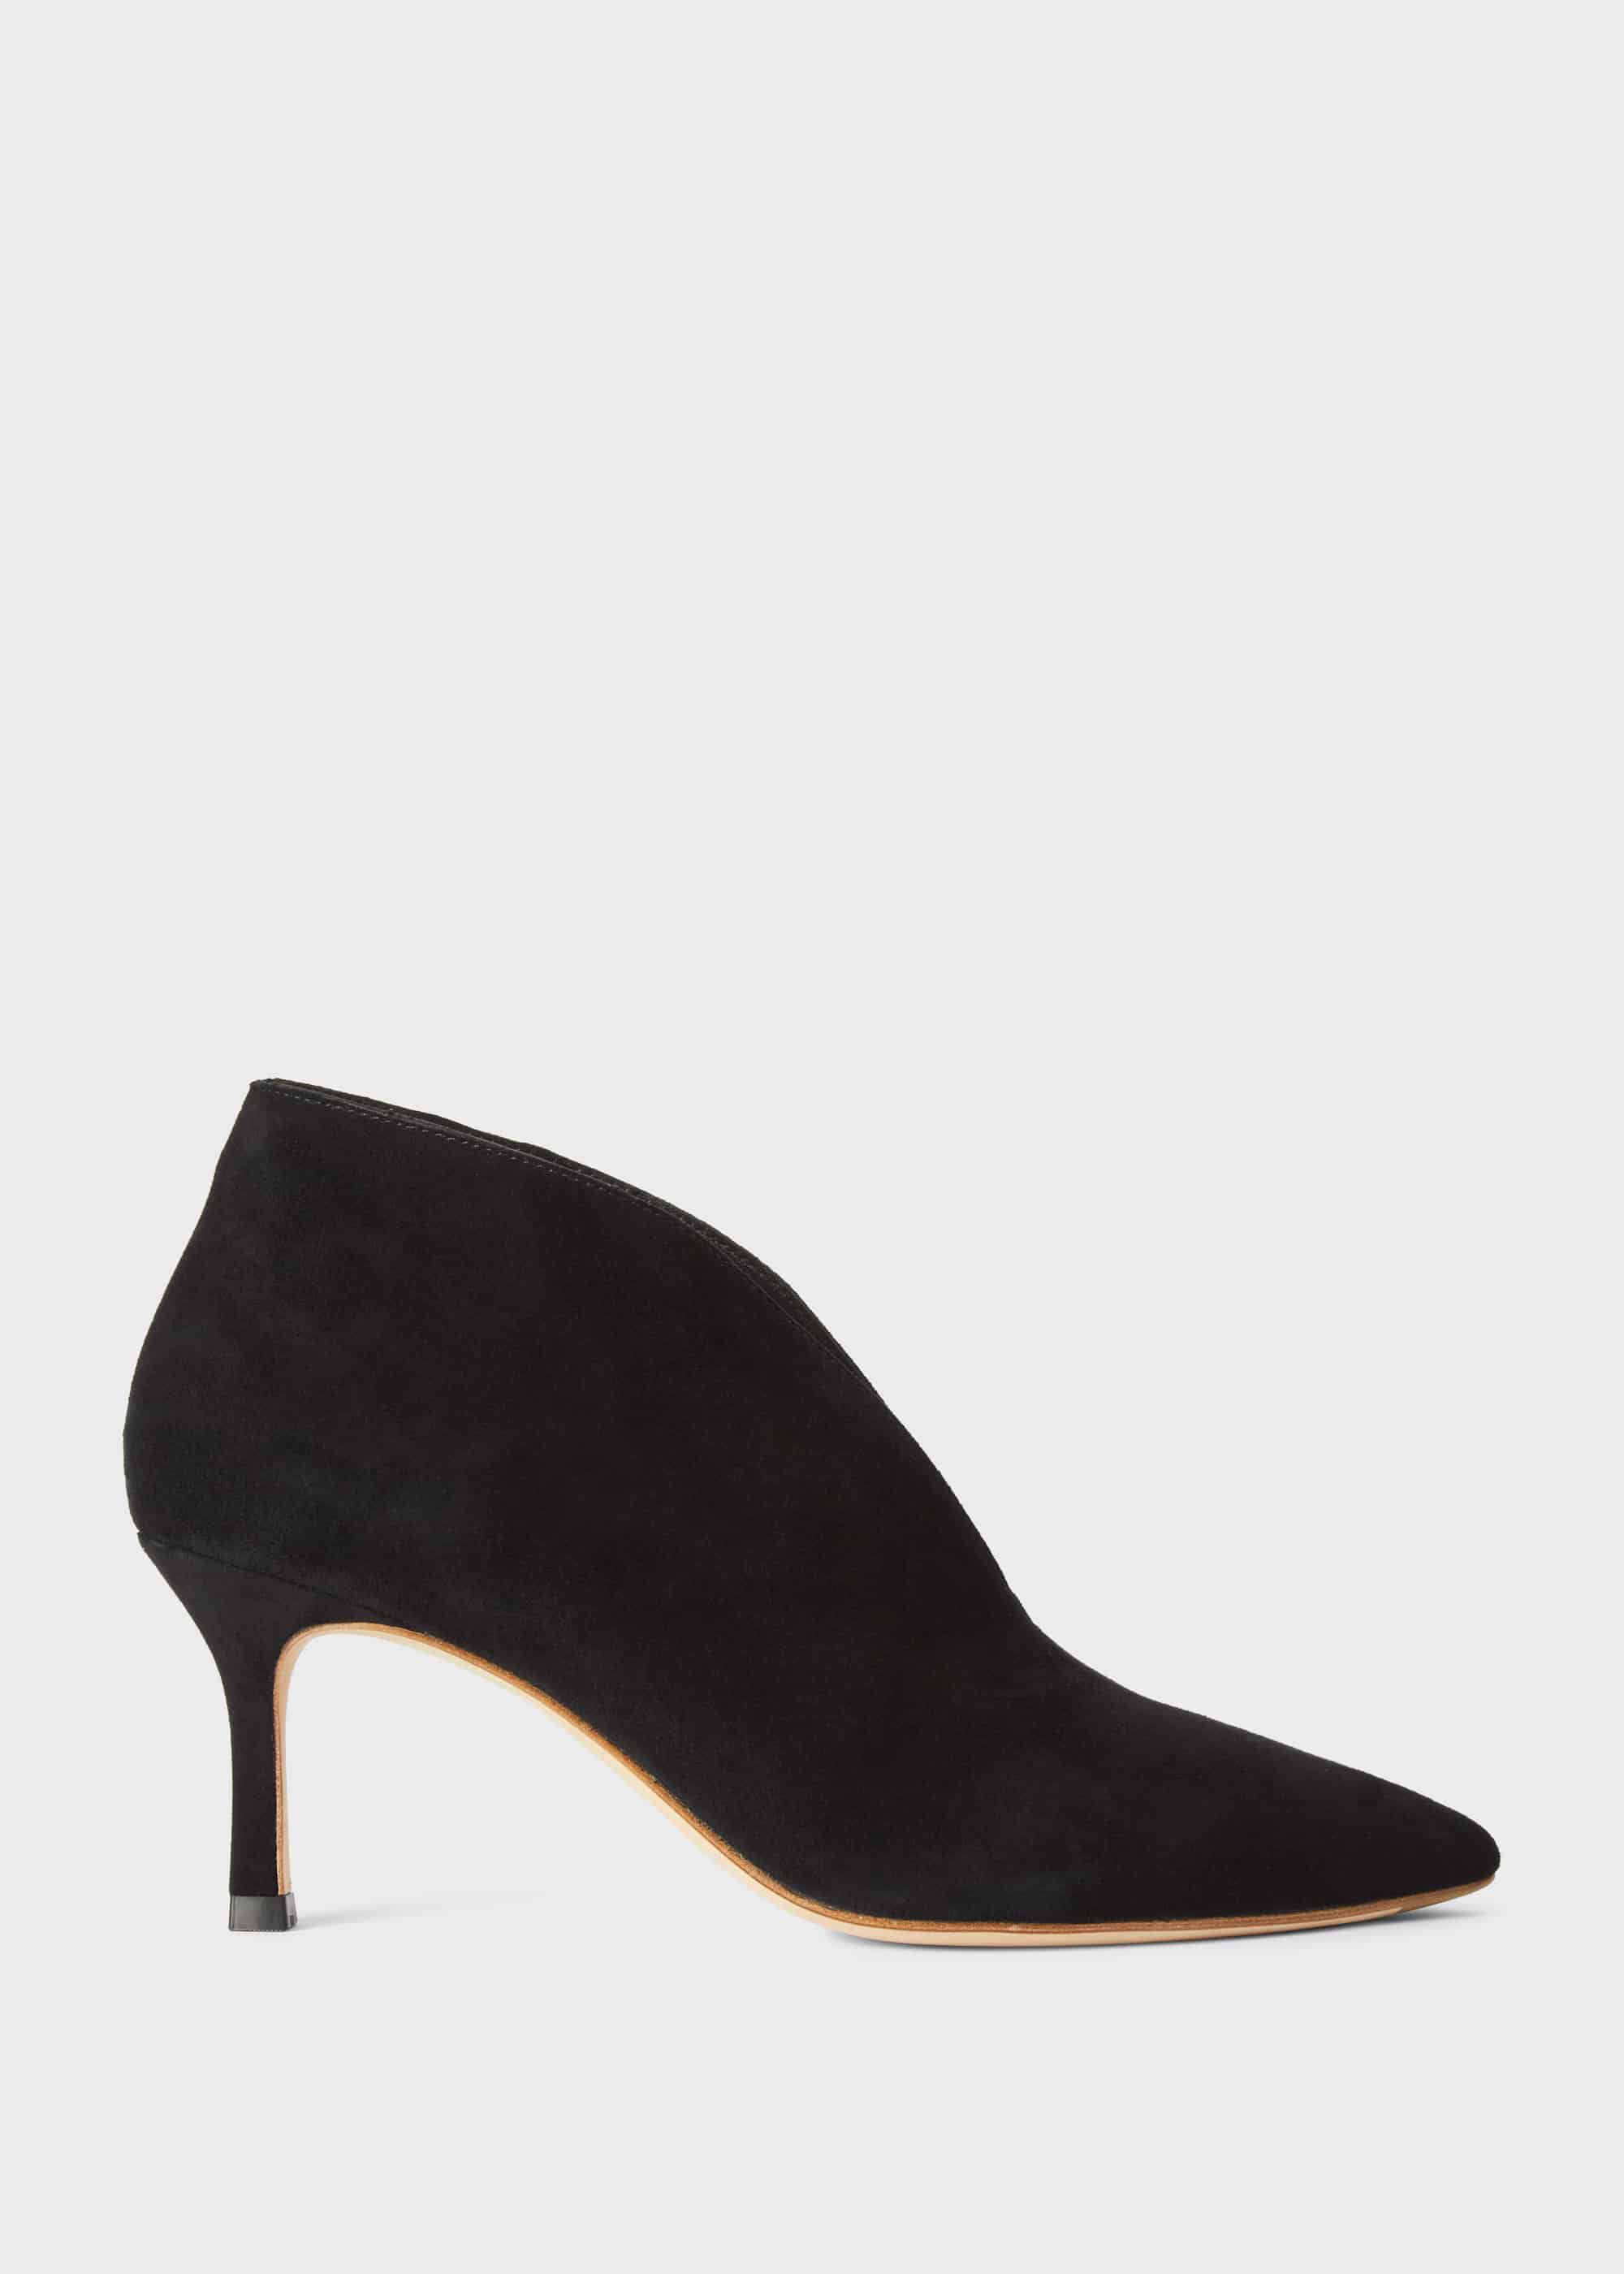 hobbs black ankle boots